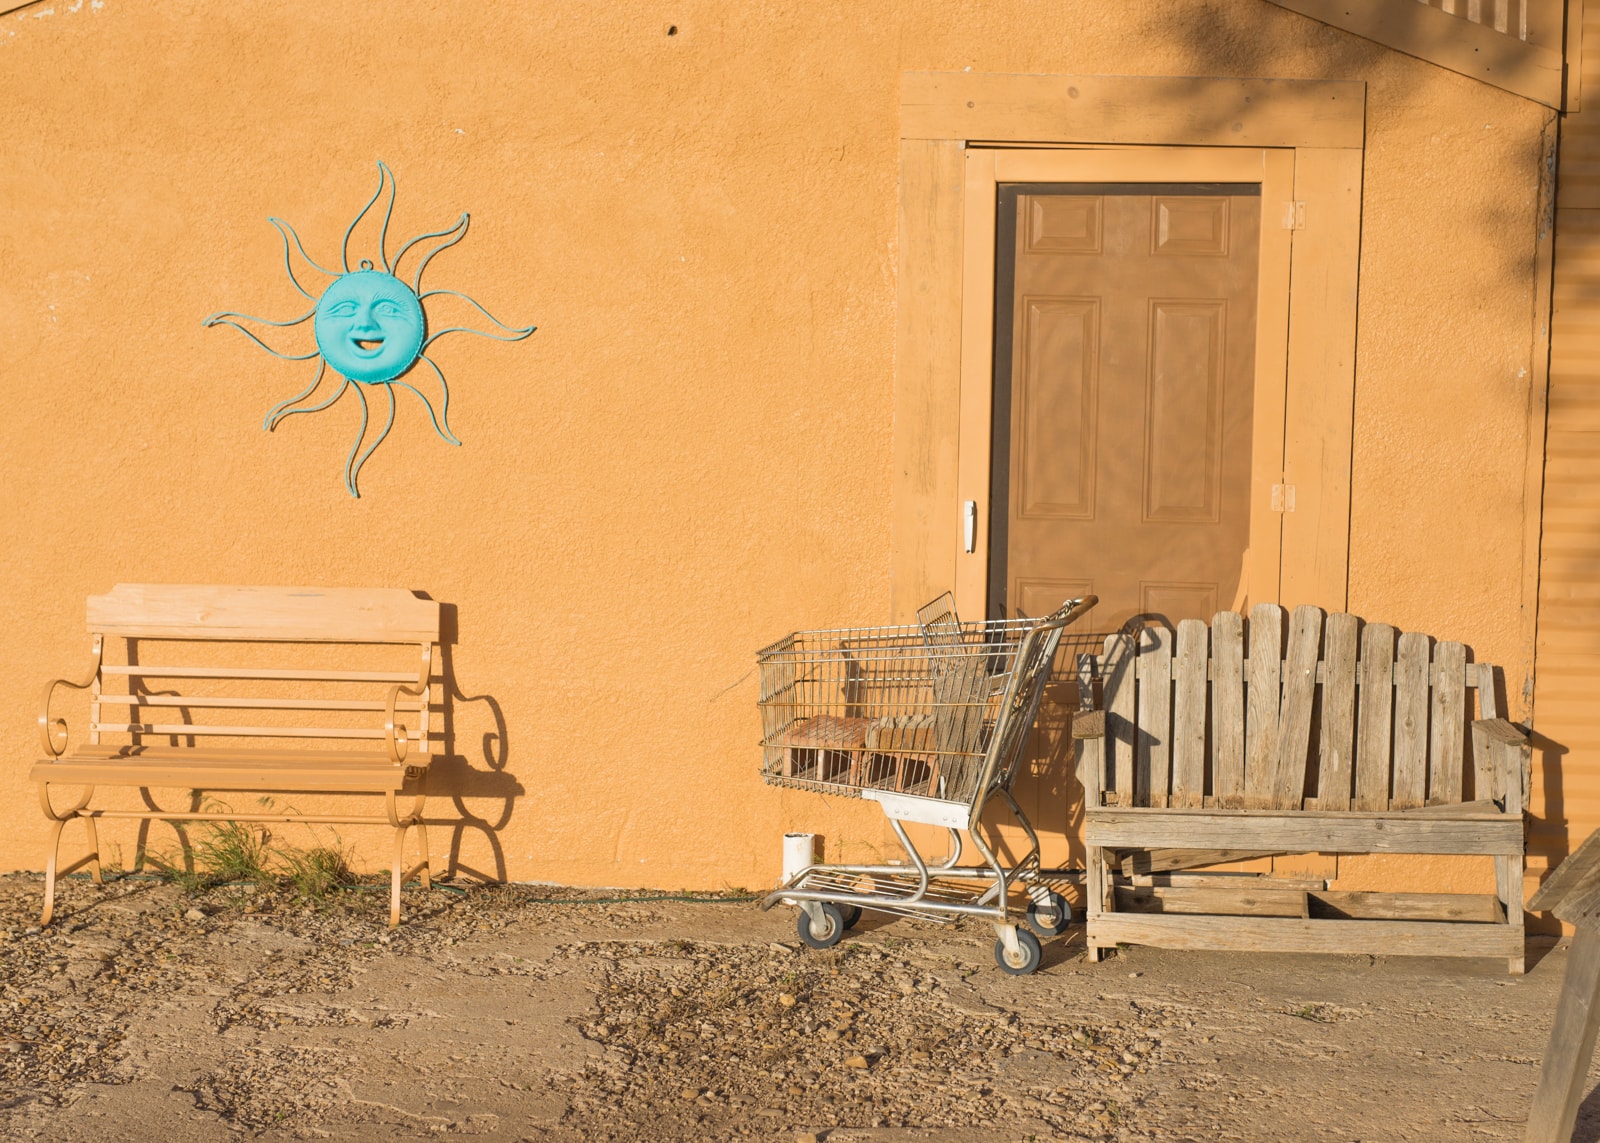 A bench, shopping cart, and blue sun in Adrian, Texas